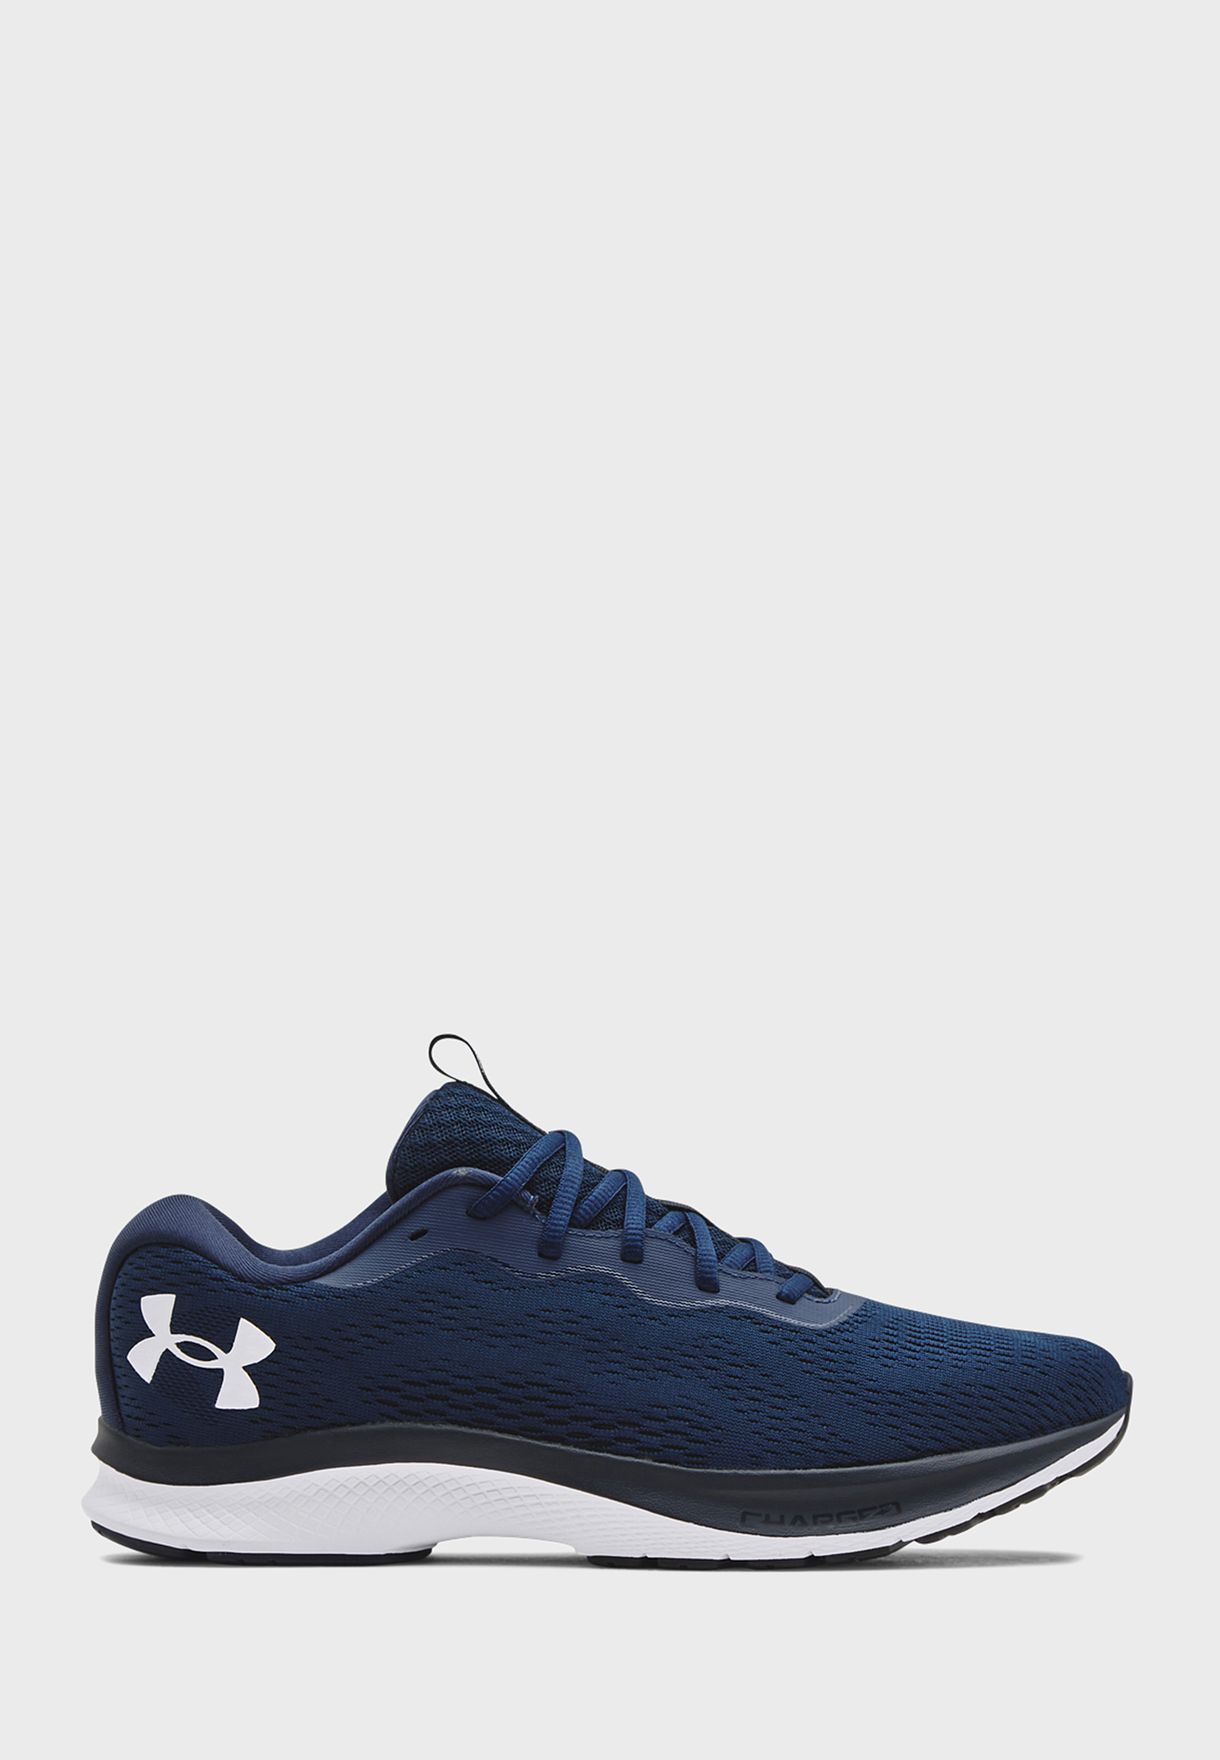 Buy Under Armour navy Charged Bandit 7 for Men in Dubai, Abu Dhabi